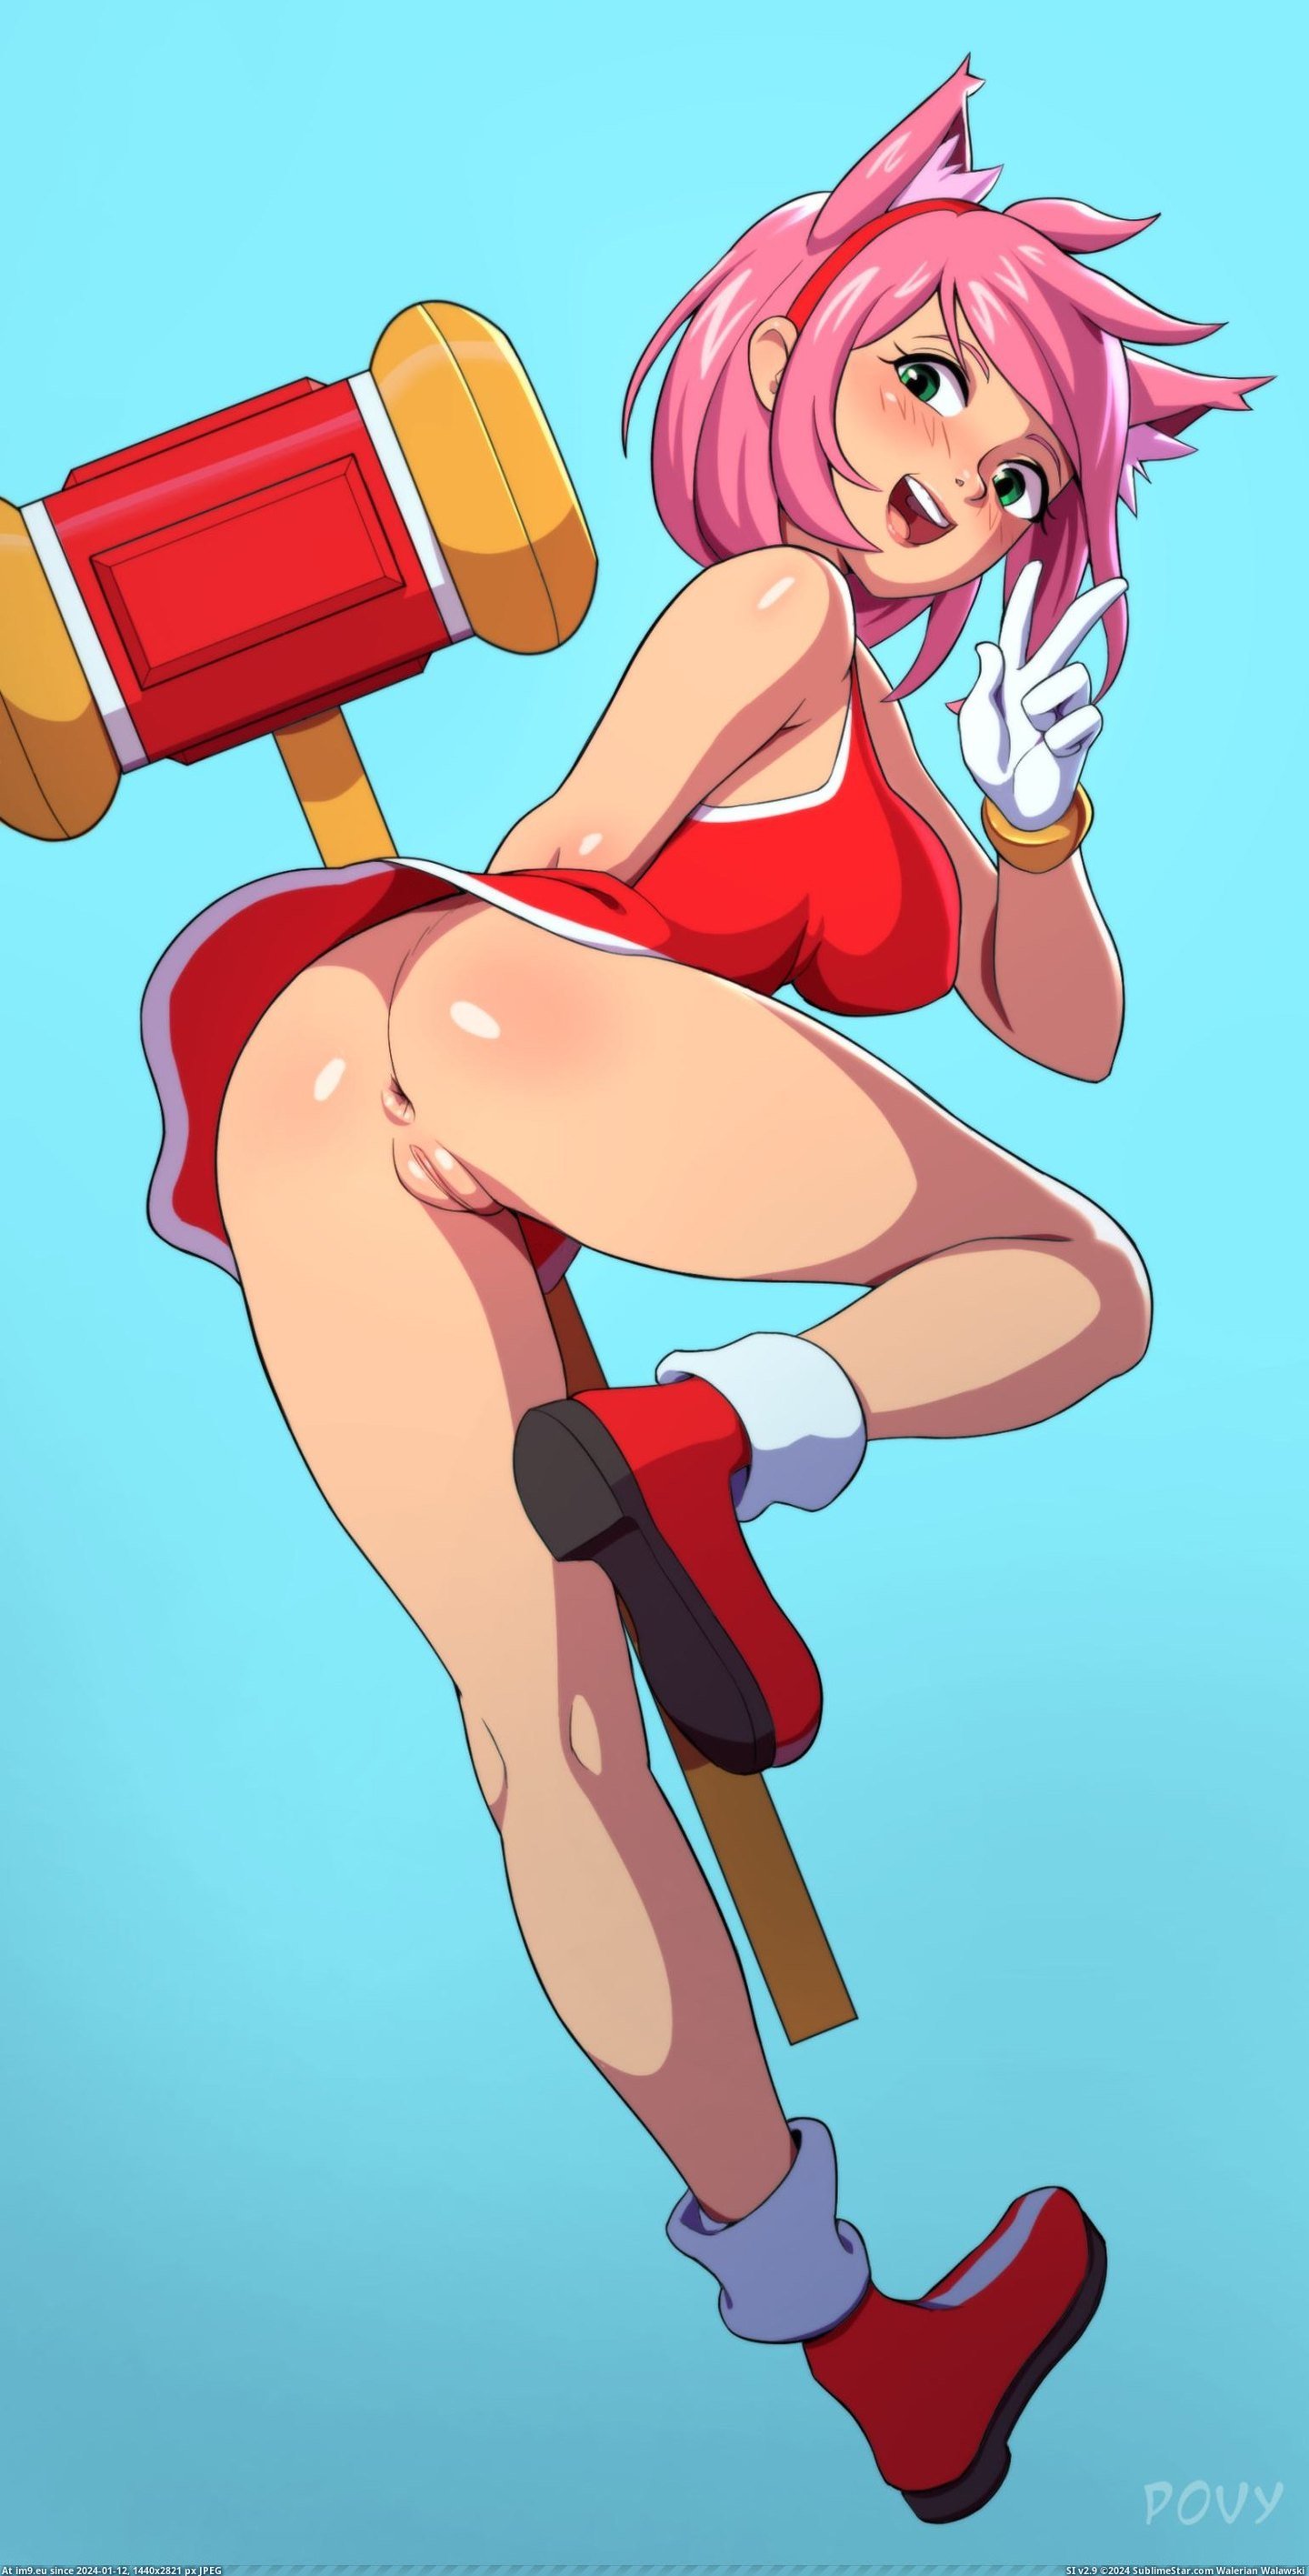 [Hentai] Human Amy Rose [Povy] (in My r/HENTAI favs)